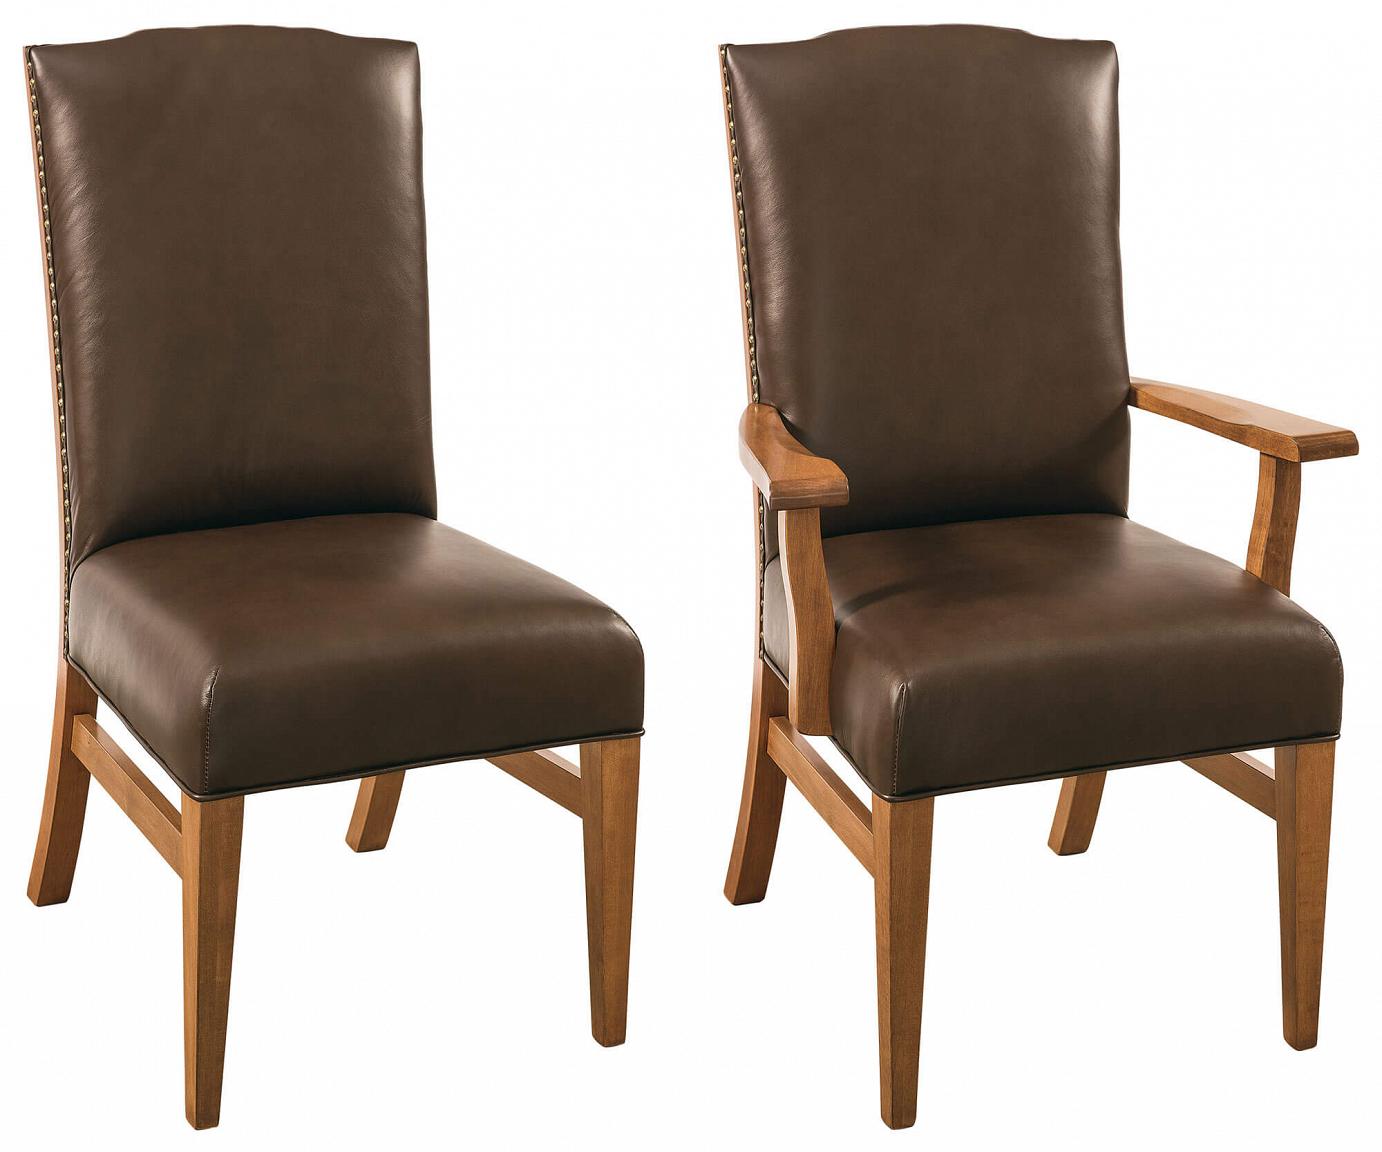 RH Yoder Bow River Chairs